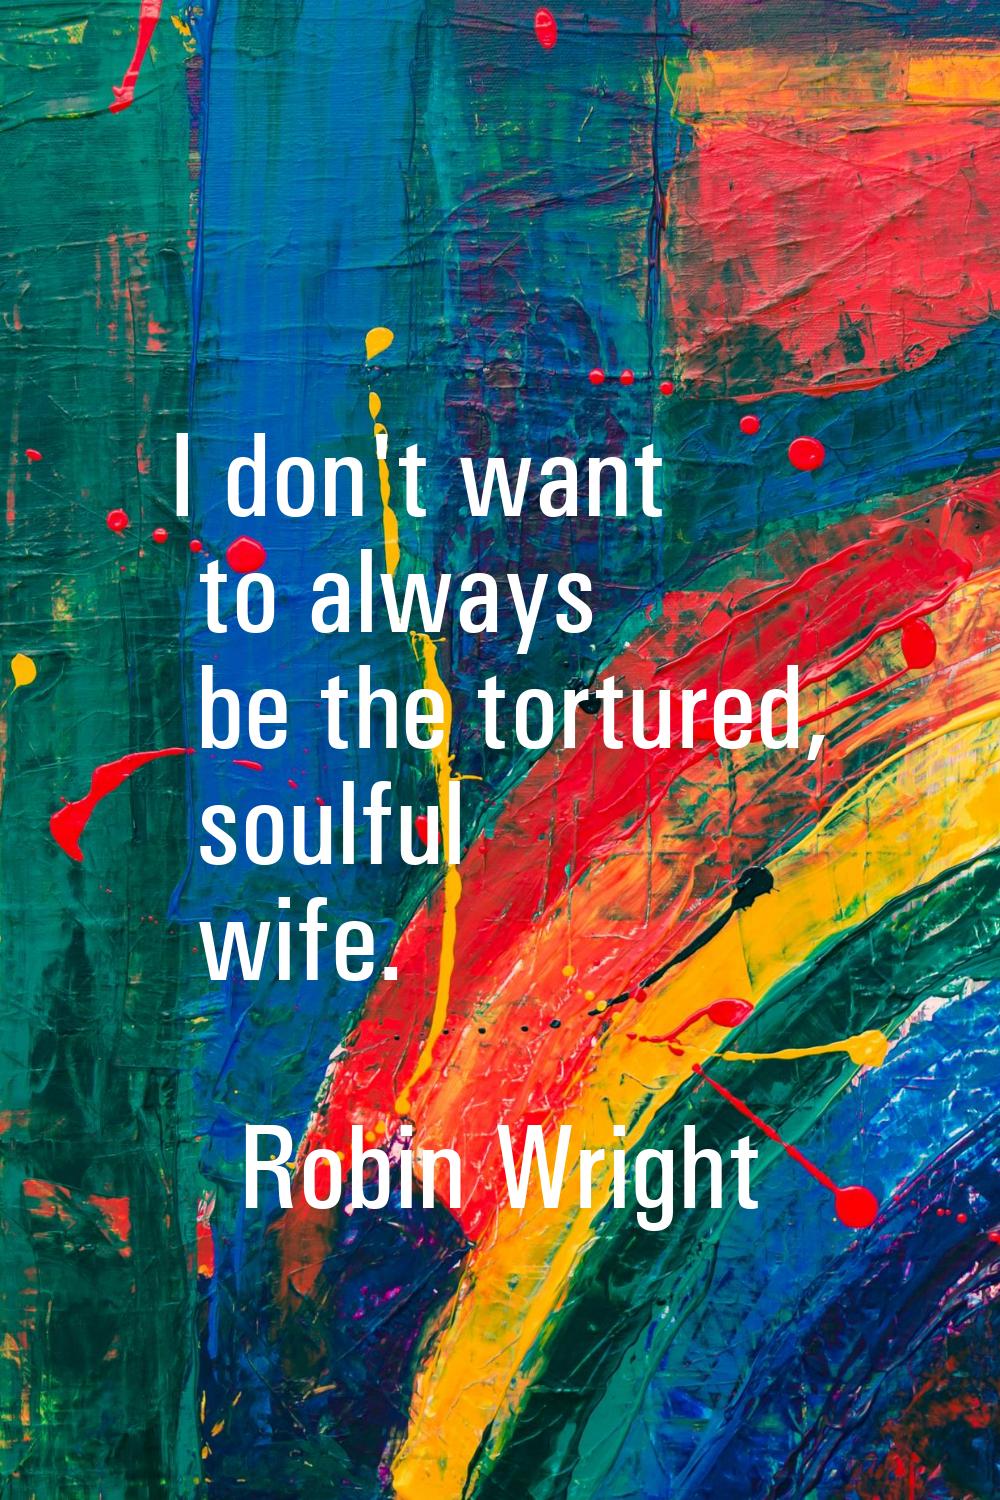 I don't want to always be the tortured, soulful wife.